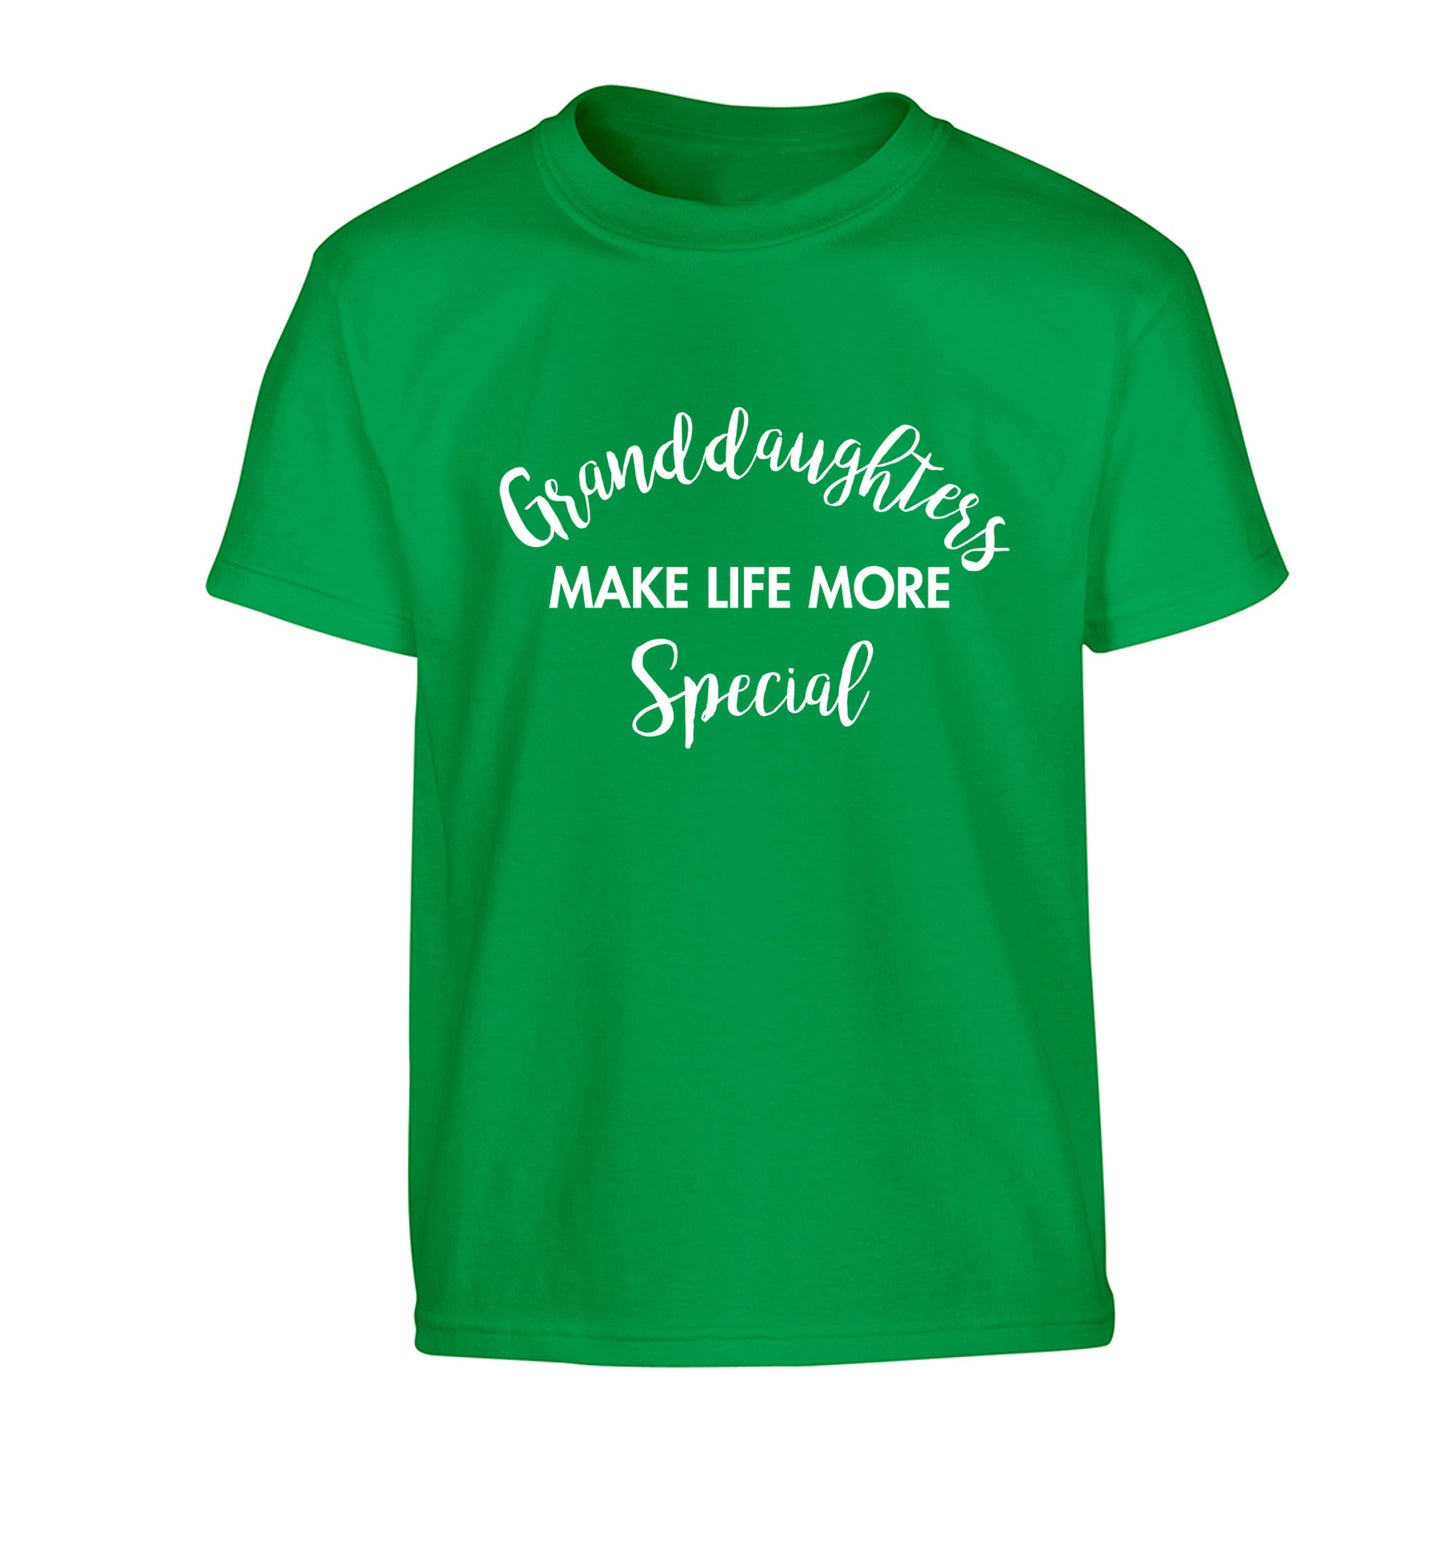 Granddaughters make life more special Children's green Tshirt 12-14 Years